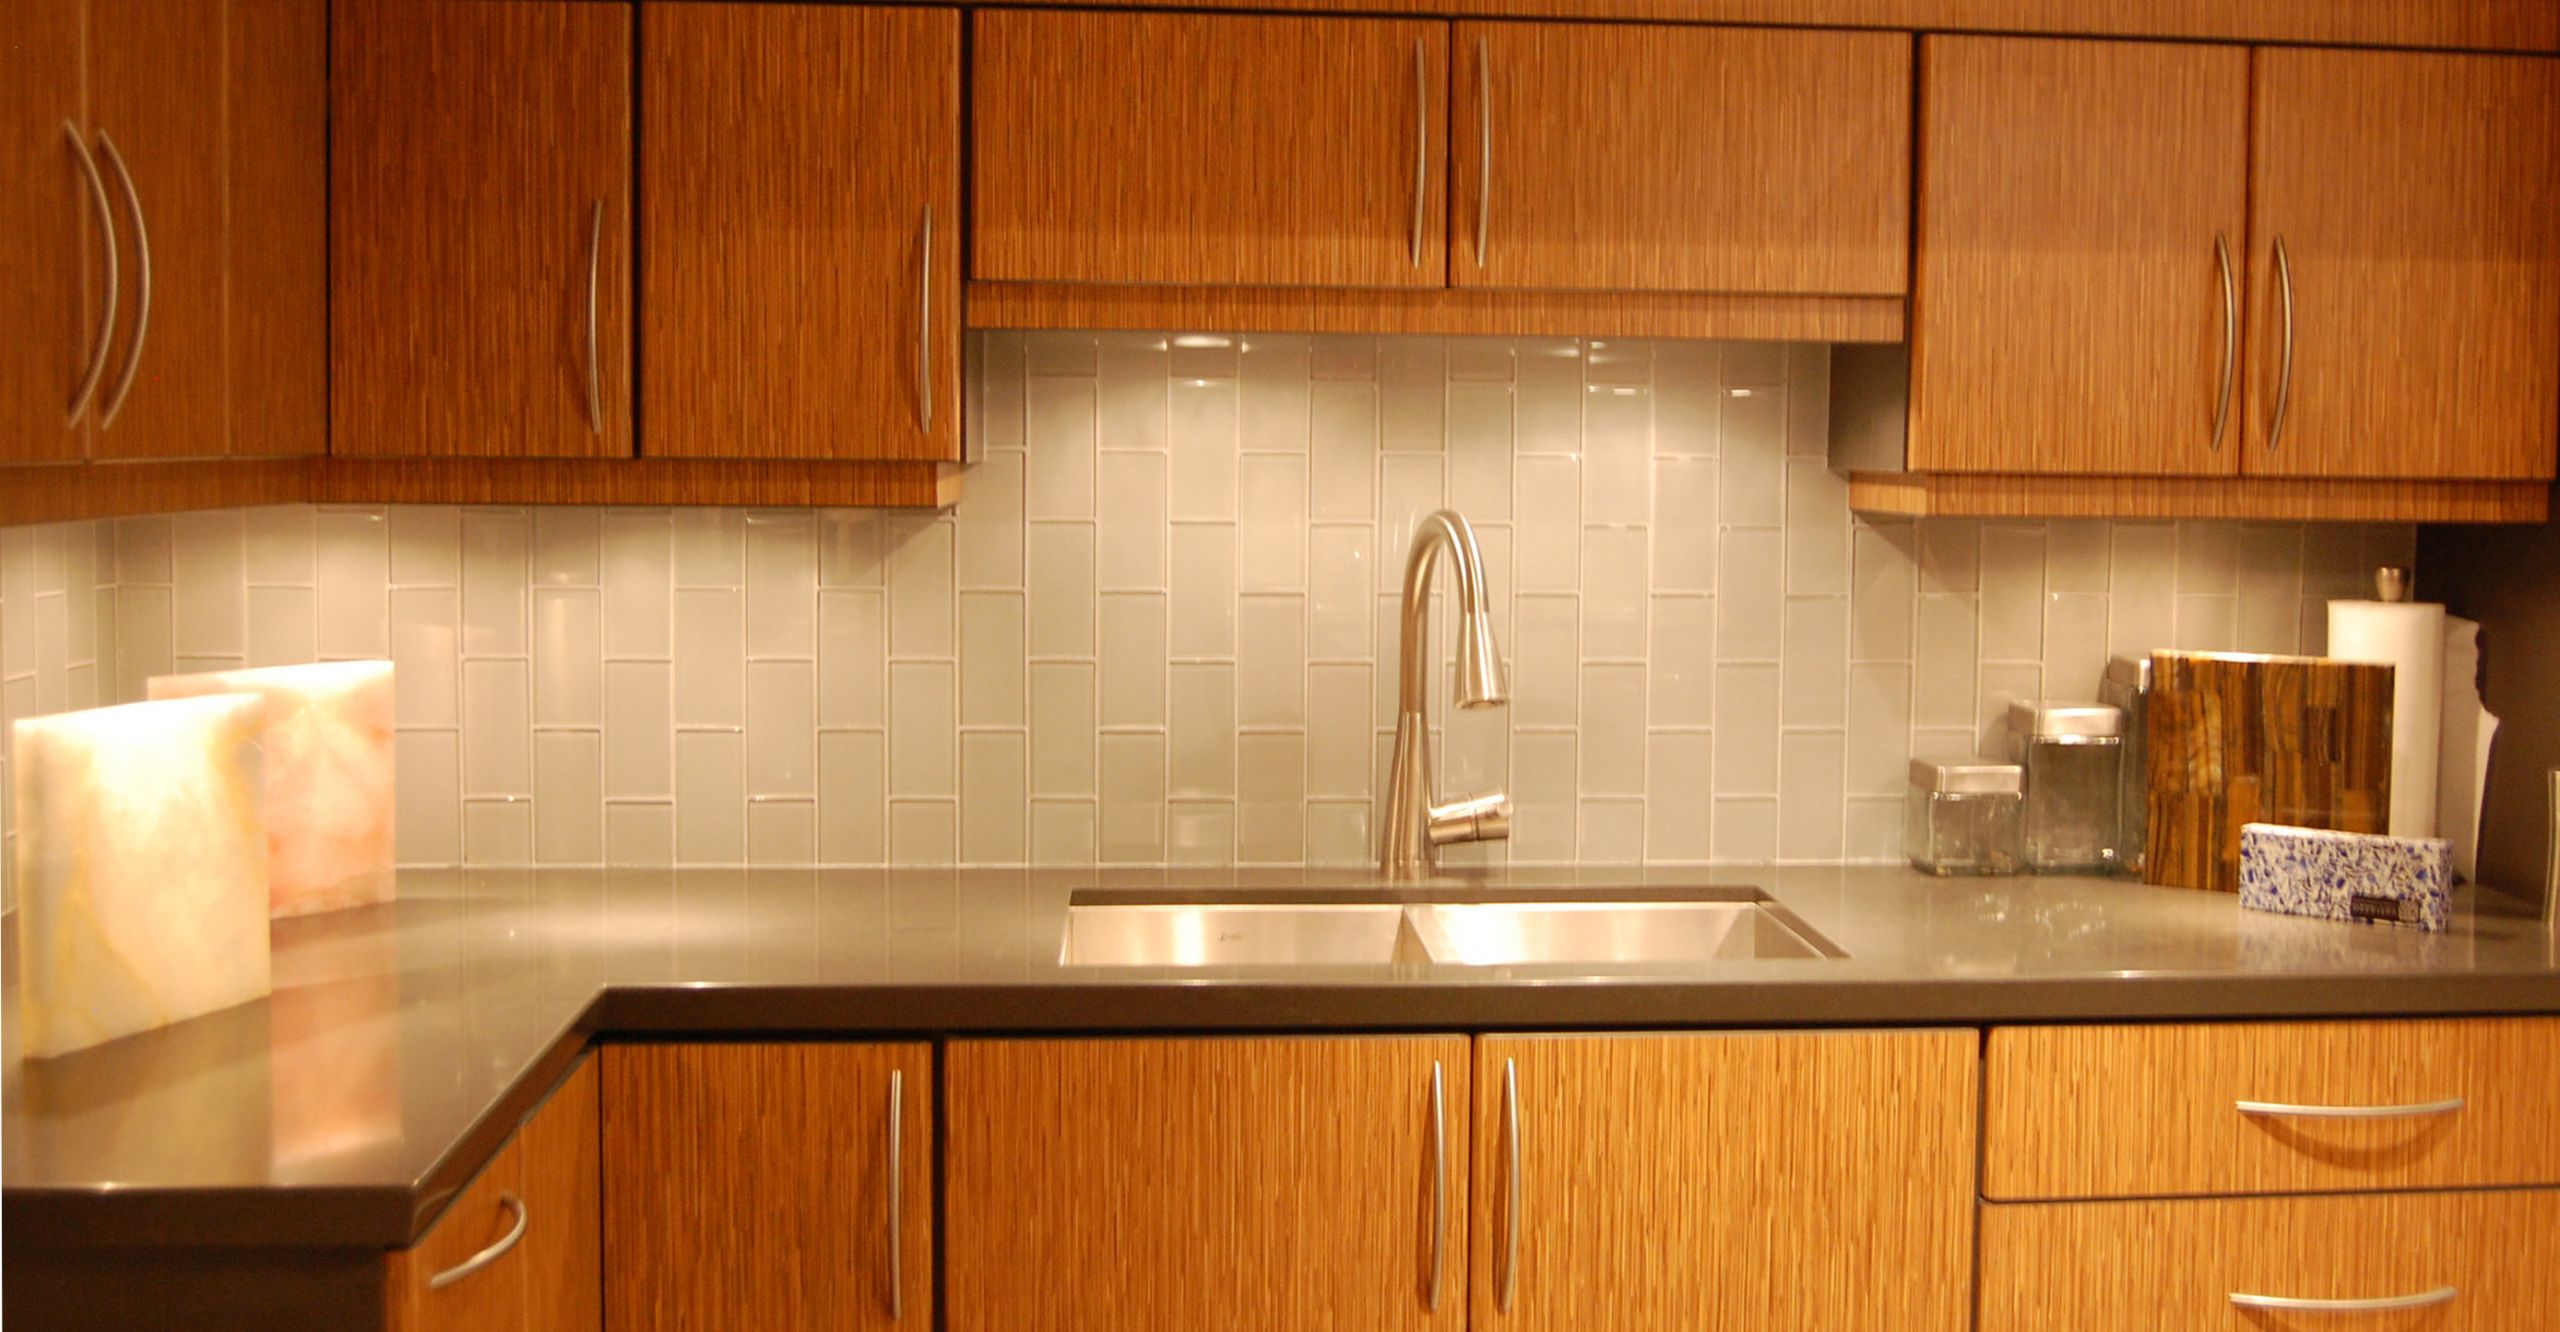 Kitchen Backsplash Menards
 Kitchen Your Kitchen Look Awesome By Using Peel And Stick